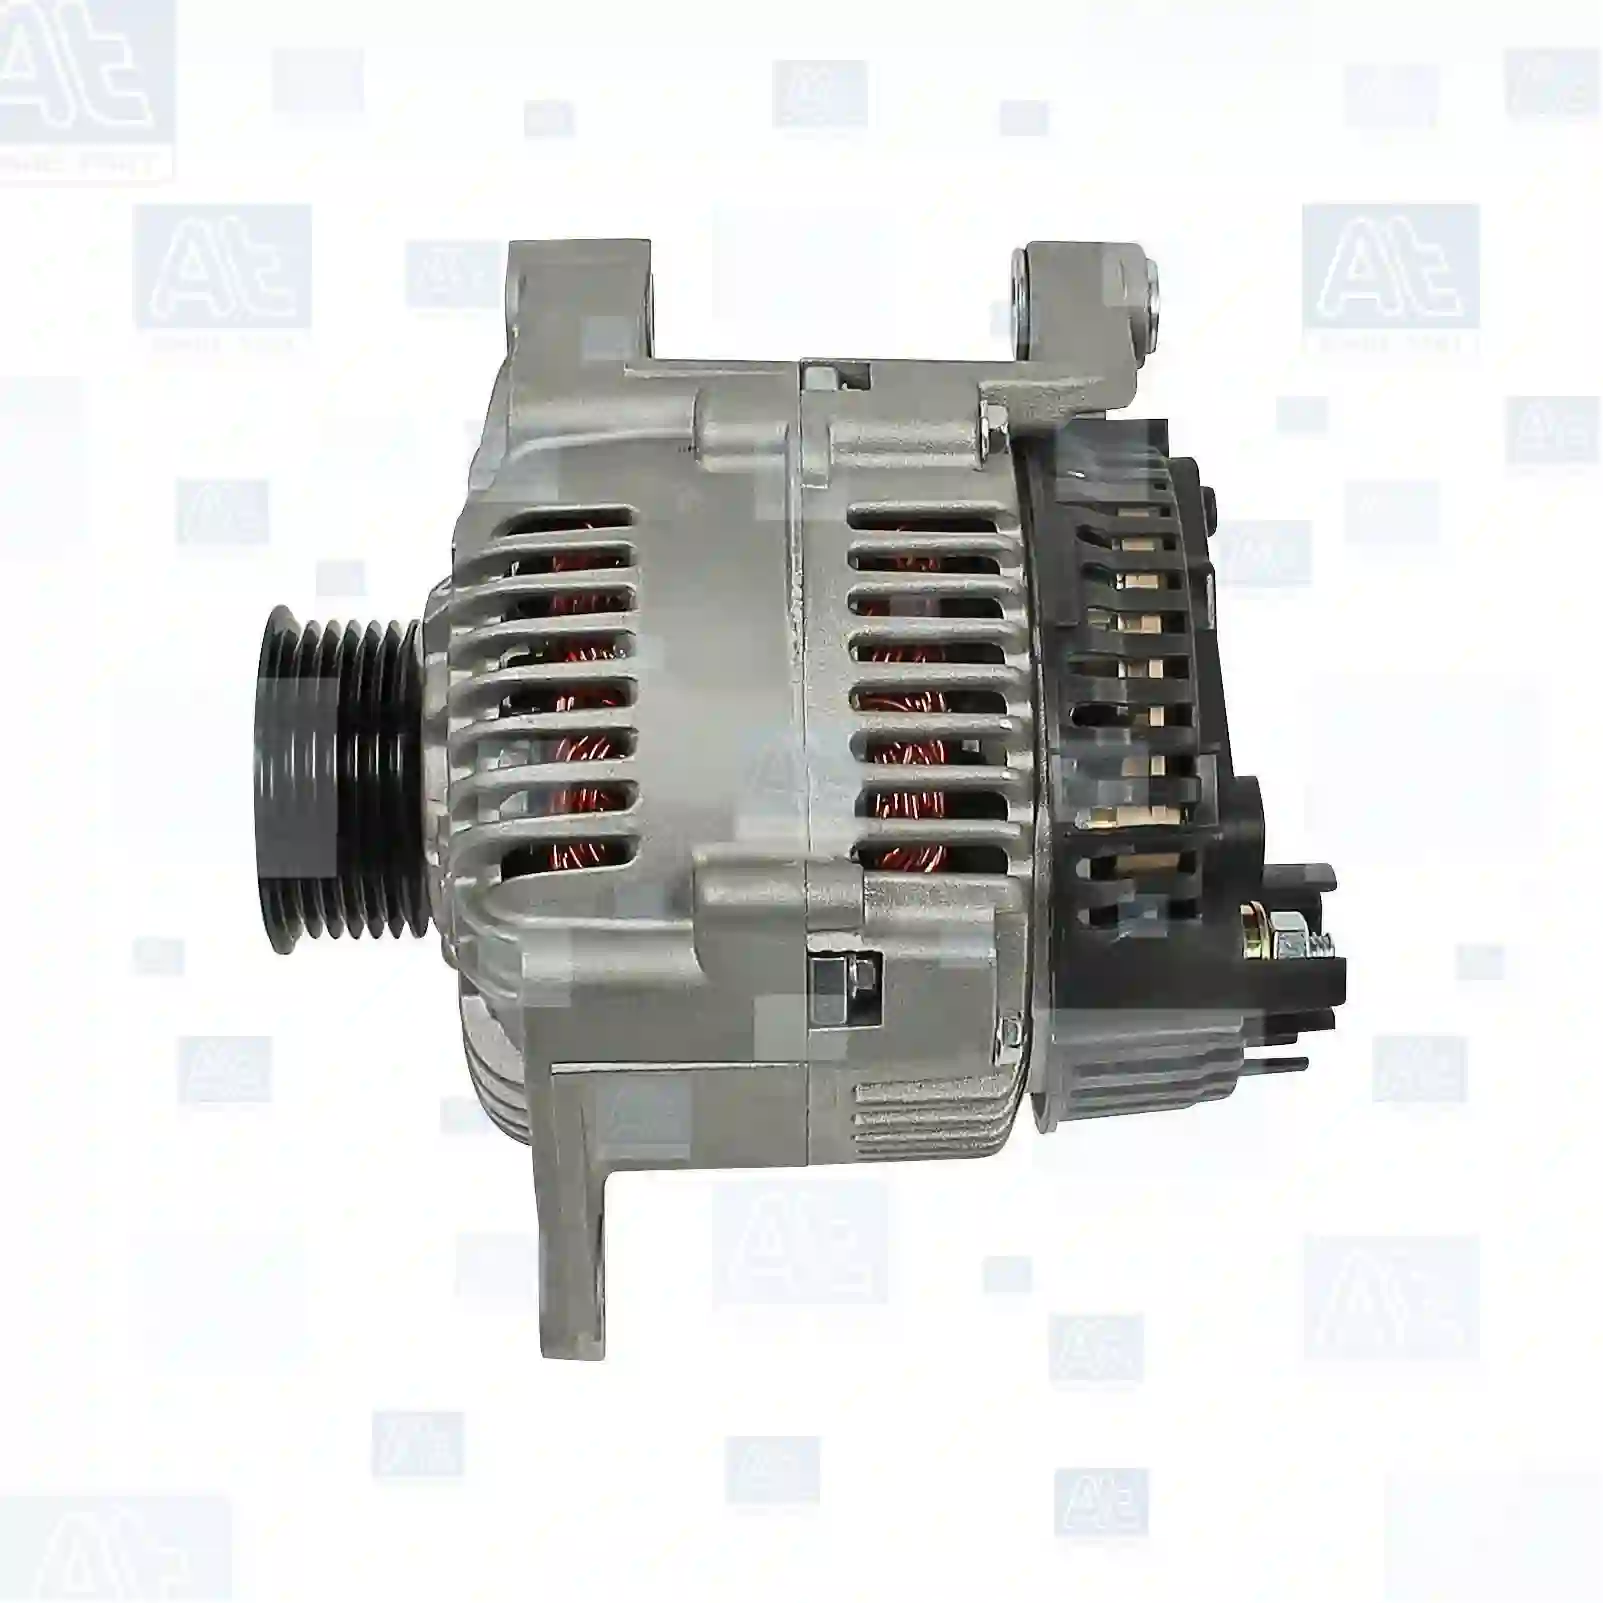 Alternator, at no 77711554, oem no: 5701A4, 5705A2, 5705C5, 5705E6, 5705EG, 5705HT, 5705L0, 5705M8, 5705M9, 5705T5, 5805E6, 9611366880, 9611369580, 9612257180, 9631318580, 9652249280, 9655249280, 9611366880, 9655249280, 71716668, 9611365980, 9611366880, 9611369580, 9612257180, 9631318580, 9655249280, 9611366880, 9655249280, SA214, 944356964, 5701A4, 5705A2, 5705C5, 5705E6, 5705EG, 5705HT, 5705L0, 5705M8, 5705M9, 5705T5, 5805E6, 9611366880, 9611369580, 9612257180, 9631318580, 9652249280, 9655249280 At Spare Part | Engine, Accelerator Pedal, Camshaft, Connecting Rod, Crankcase, Crankshaft, Cylinder Head, Engine Suspension Mountings, Exhaust Manifold, Exhaust Gas Recirculation, Filter Kits, Flywheel Housing, General Overhaul Kits, Engine, Intake Manifold, Oil Cleaner, Oil Cooler, Oil Filter, Oil Pump, Oil Sump, Piston & Liner, Sensor & Switch, Timing Case, Turbocharger, Cooling System, Belt Tensioner, Coolant Filter, Coolant Pipe, Corrosion Prevention Agent, Drive, Expansion Tank, Fan, Intercooler, Monitors & Gauges, Radiator, Thermostat, V-Belt / Timing belt, Water Pump, Fuel System, Electronical Injector Unit, Feed Pump, Fuel Filter, cpl., Fuel Gauge Sender,  Fuel Line, Fuel Pump, Fuel Tank, Injection Line Kit, Injection Pump, Exhaust System, Clutch & Pedal, Gearbox, Propeller Shaft, Axles, Brake System, Hubs & Wheels, Suspension, Leaf Spring, Universal Parts / Accessories, Steering, Electrical System, Cabin Alternator, at no 77711554, oem no: 5701A4, 5705A2, 5705C5, 5705E6, 5705EG, 5705HT, 5705L0, 5705M8, 5705M9, 5705T5, 5805E6, 9611366880, 9611369580, 9612257180, 9631318580, 9652249280, 9655249280, 9611366880, 9655249280, 71716668, 9611365980, 9611366880, 9611369580, 9612257180, 9631318580, 9655249280, 9611366880, 9655249280, SA214, 944356964, 5701A4, 5705A2, 5705C5, 5705E6, 5705EG, 5705HT, 5705L0, 5705M8, 5705M9, 5705T5, 5805E6, 9611366880, 9611369580, 9612257180, 9631318580, 9652249280, 9655249280 At Spare Part | Engine, Accelerator Pedal, Camshaft, Connecting Rod, Crankcase, Crankshaft, Cylinder Head, Engine Suspension Mountings, Exhaust Manifold, Exhaust Gas Recirculation, Filter Kits, Flywheel Housing, General Overhaul Kits, Engine, Intake Manifold, Oil Cleaner, Oil Cooler, Oil Filter, Oil Pump, Oil Sump, Piston & Liner, Sensor & Switch, Timing Case, Turbocharger, Cooling System, Belt Tensioner, Coolant Filter, Coolant Pipe, Corrosion Prevention Agent, Drive, Expansion Tank, Fan, Intercooler, Monitors & Gauges, Radiator, Thermostat, V-Belt / Timing belt, Water Pump, Fuel System, Electronical Injector Unit, Feed Pump, Fuel Filter, cpl., Fuel Gauge Sender,  Fuel Line, Fuel Pump, Fuel Tank, Injection Line Kit, Injection Pump, Exhaust System, Clutch & Pedal, Gearbox, Propeller Shaft, Axles, Brake System, Hubs & Wheels, Suspension, Leaf Spring, Universal Parts / Accessories, Steering, Electrical System, Cabin